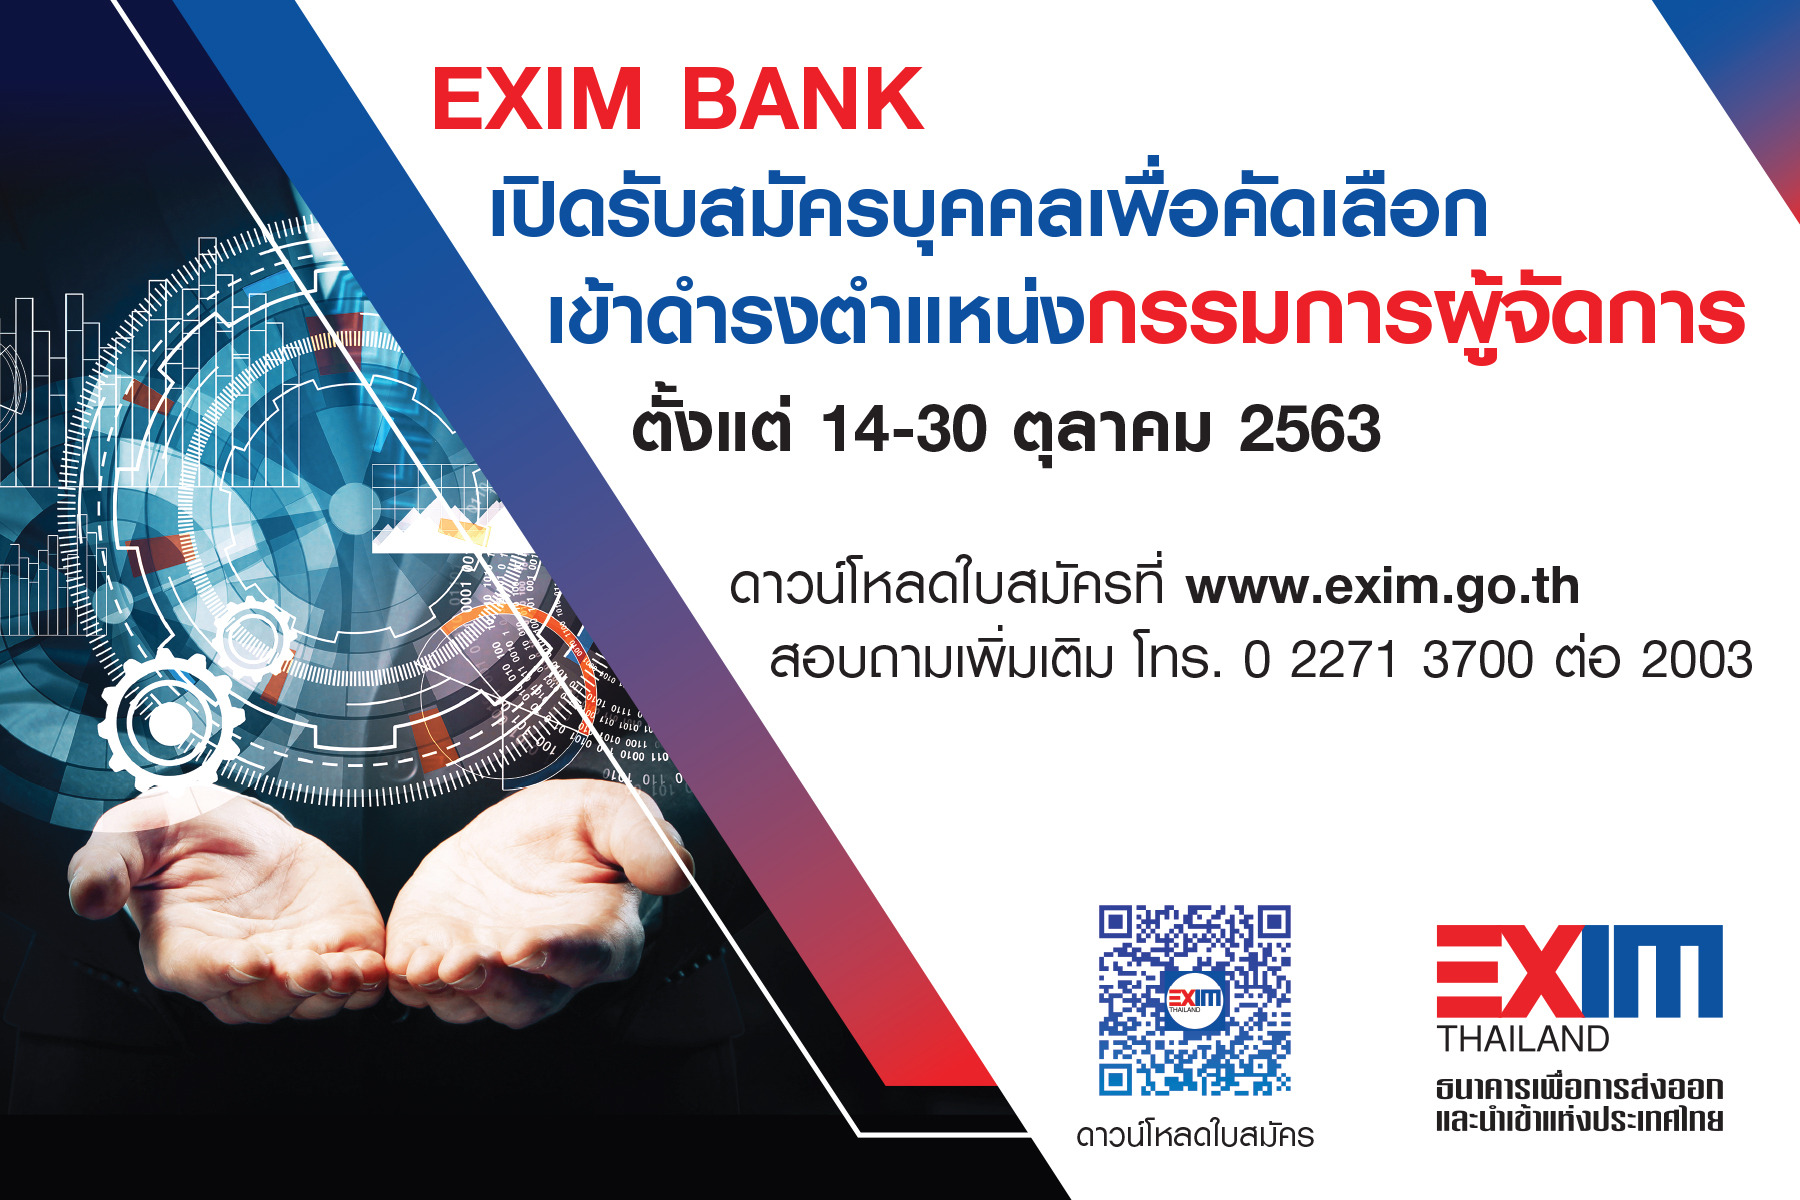 EXIM Thailand Invites Applications for the Position of President